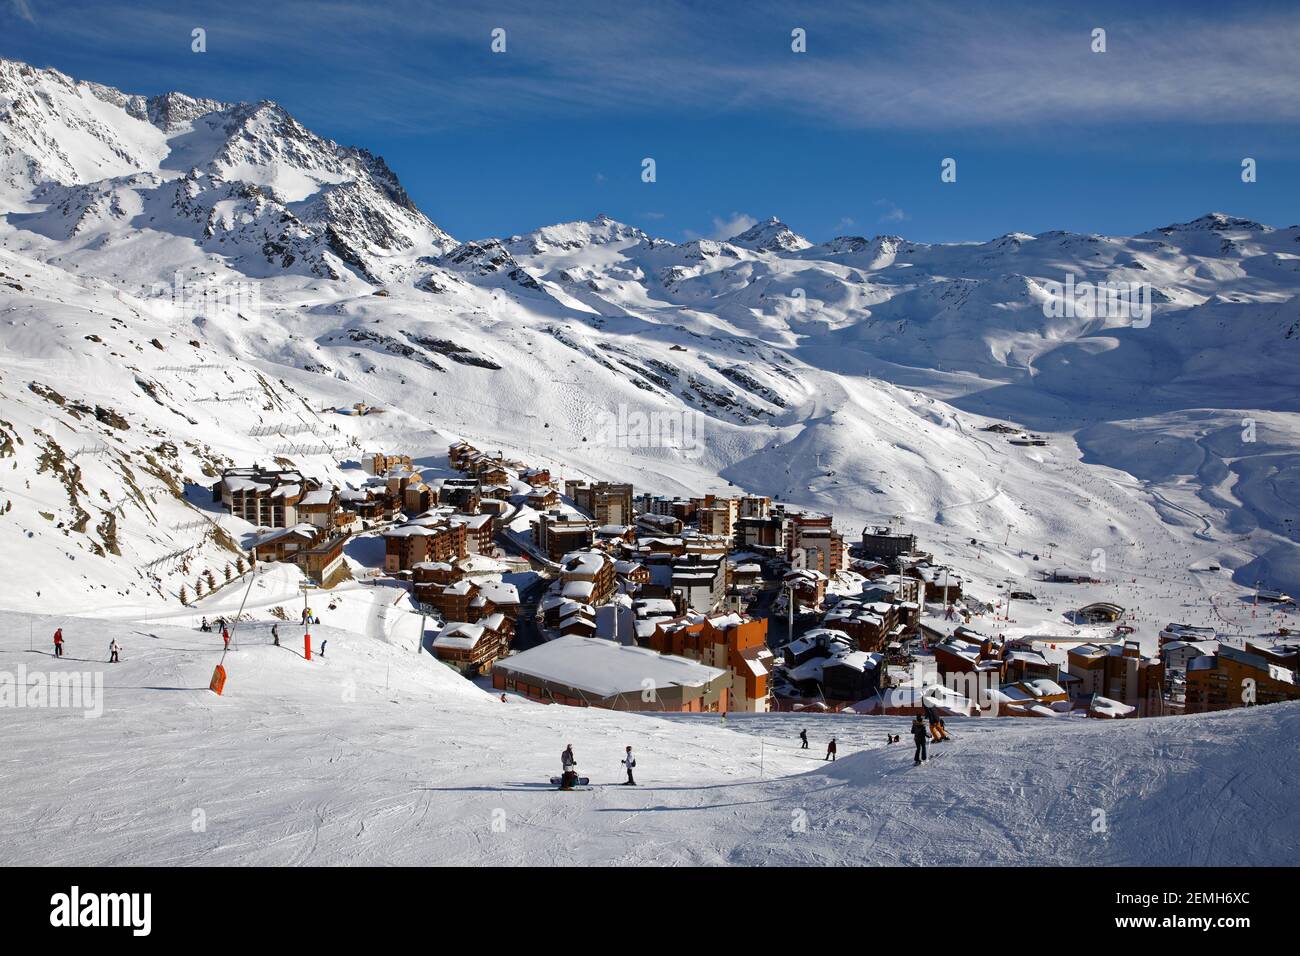 Val Thorens, France - March 7, 2019: Val Thorens is the highest ski resort in Europe at an altitude of 2300 m. The resort forms part of the 3 vallées Stock Photo